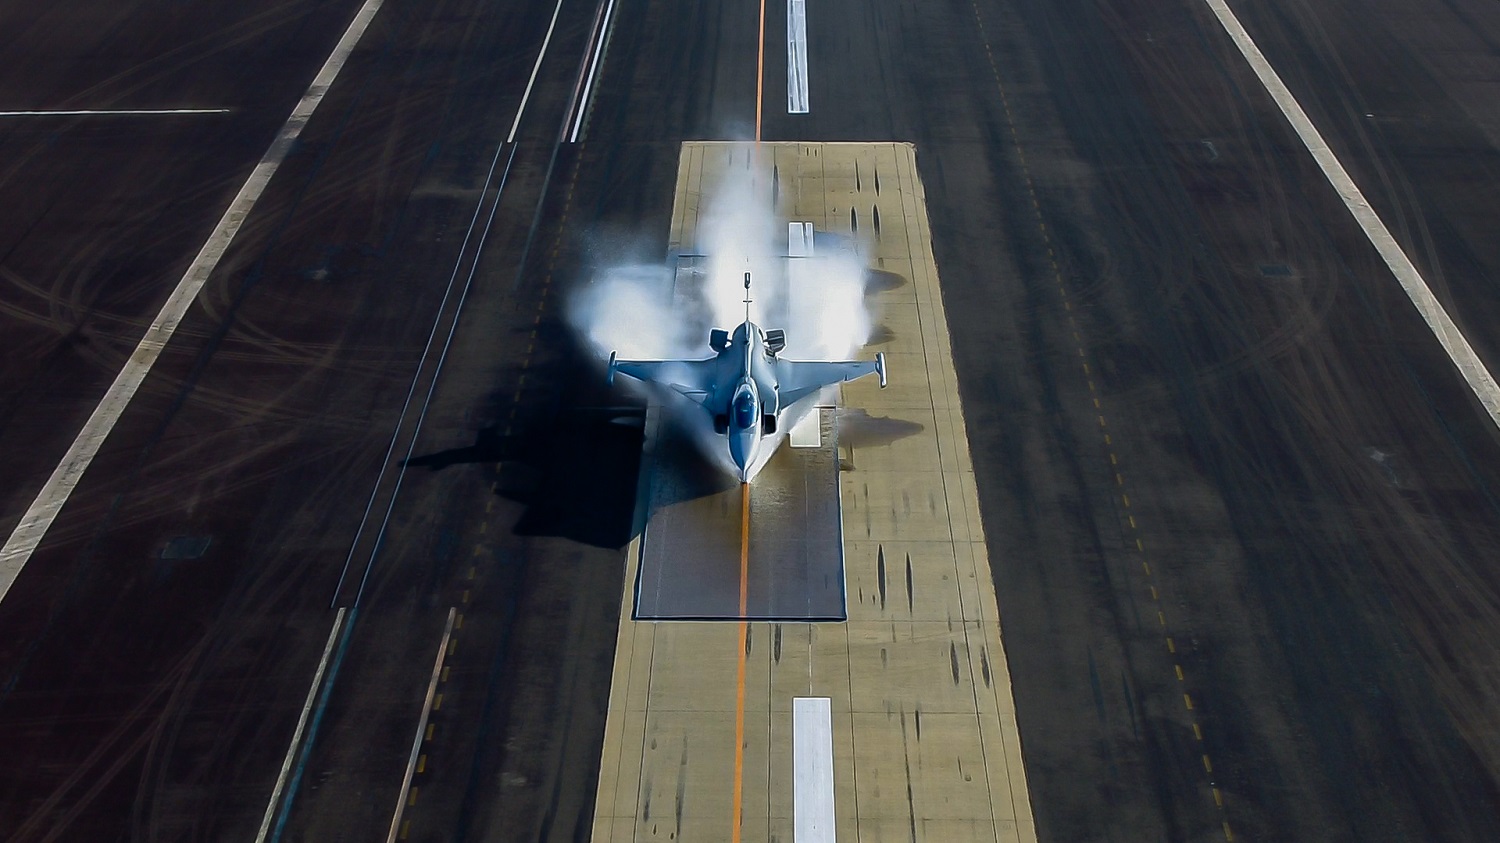 Saab Conducts Water Spray Test With Gripen E Fighter at Gripen Flight Test Centre, Brazil